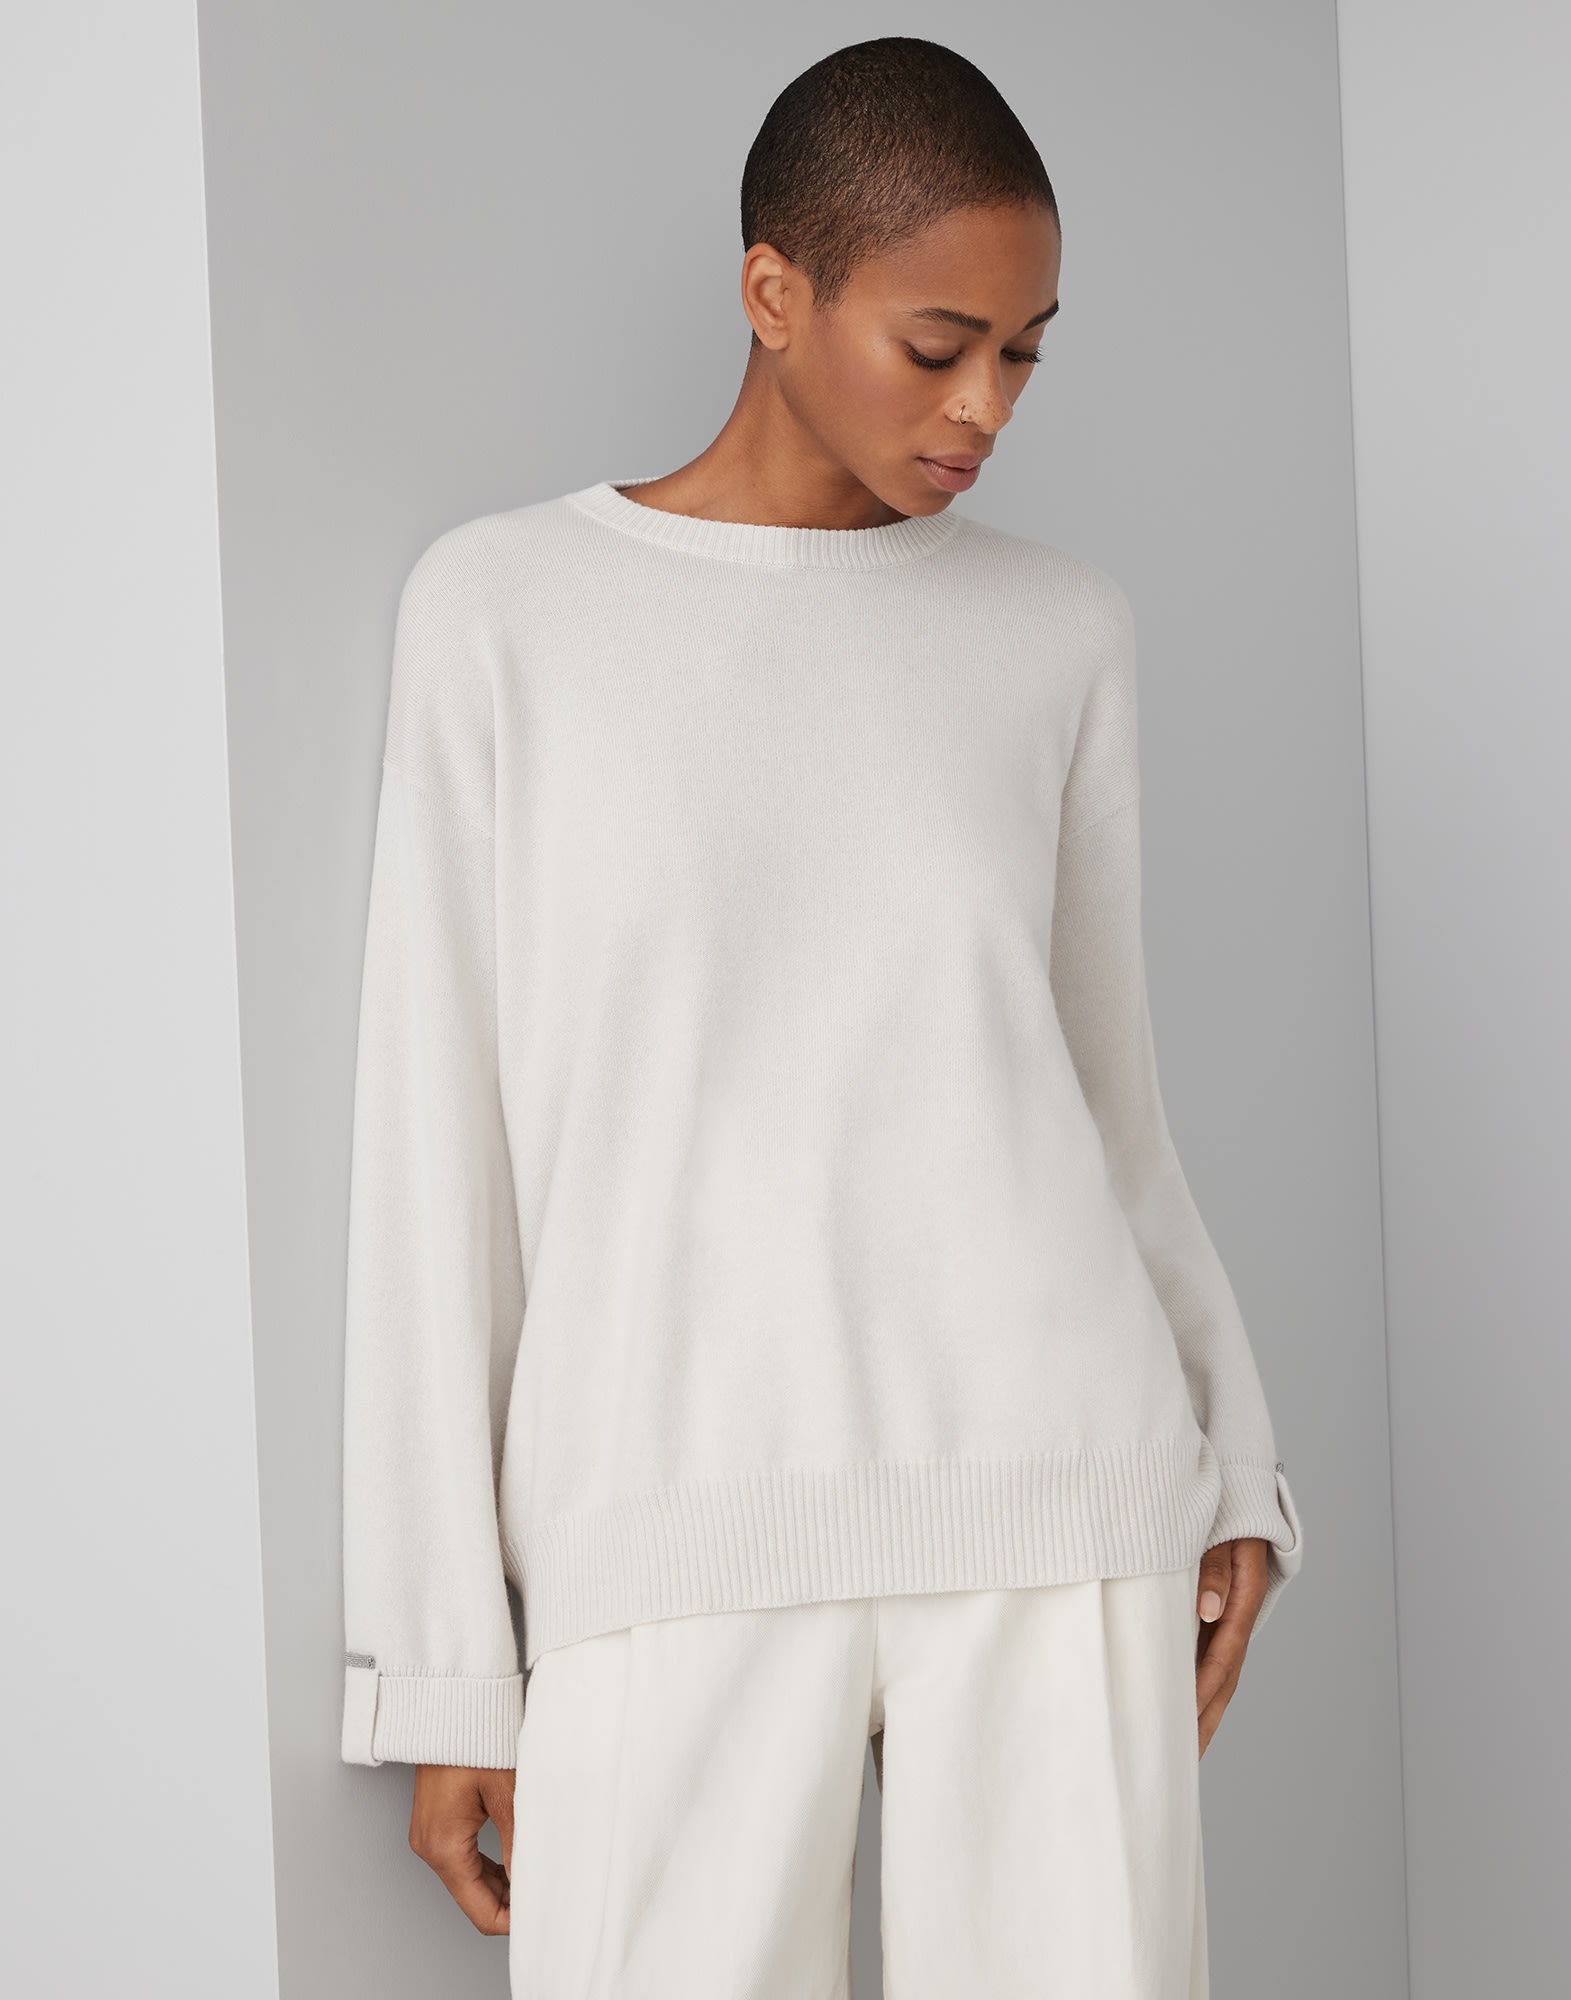 Cashmere sweater with shiny details - 1